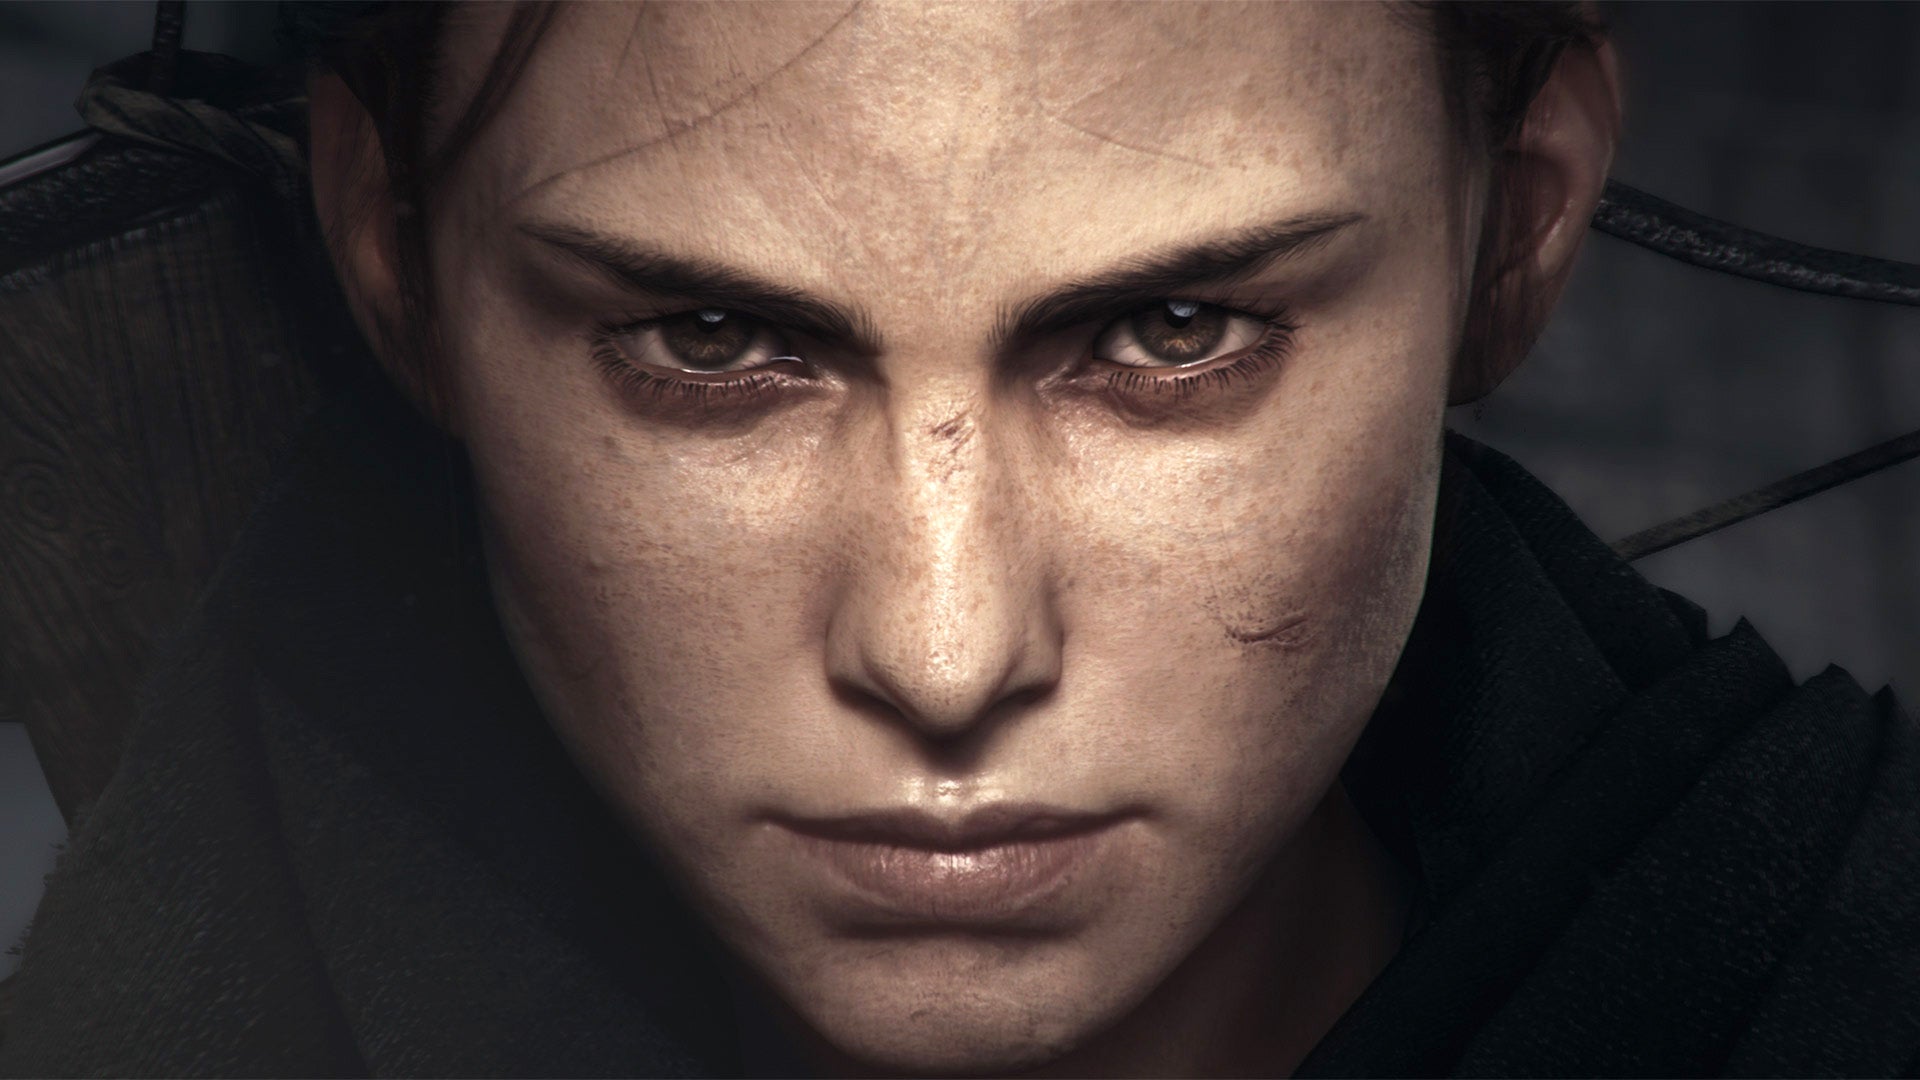 A teenage girl stares with steely determination at the camera. It's Amicia, the main character in the Plague Tale games.